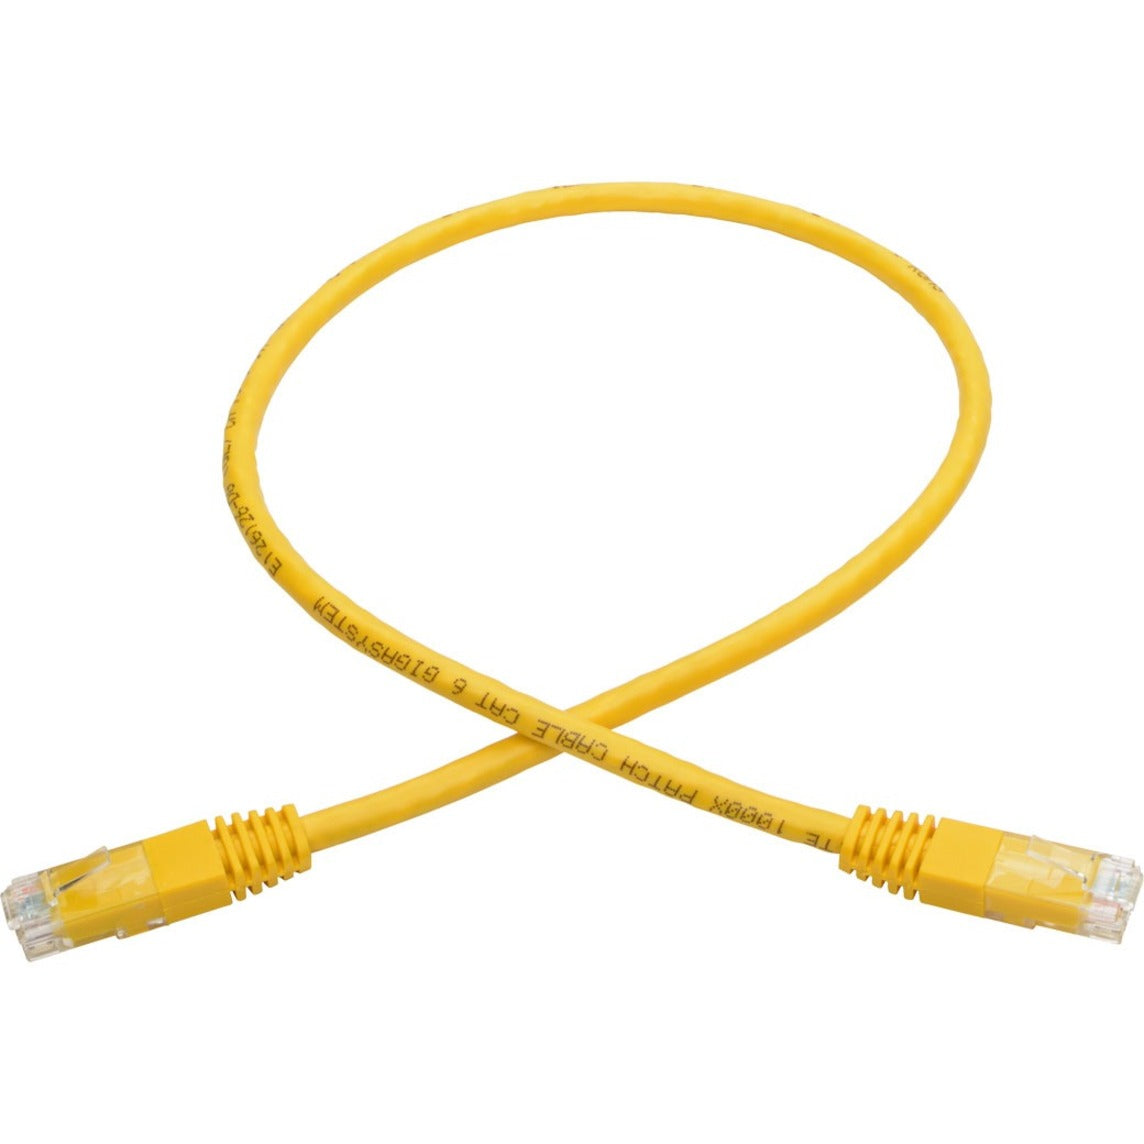 Tripp Lite by Eaton (N200-002-YW) Connector Cable